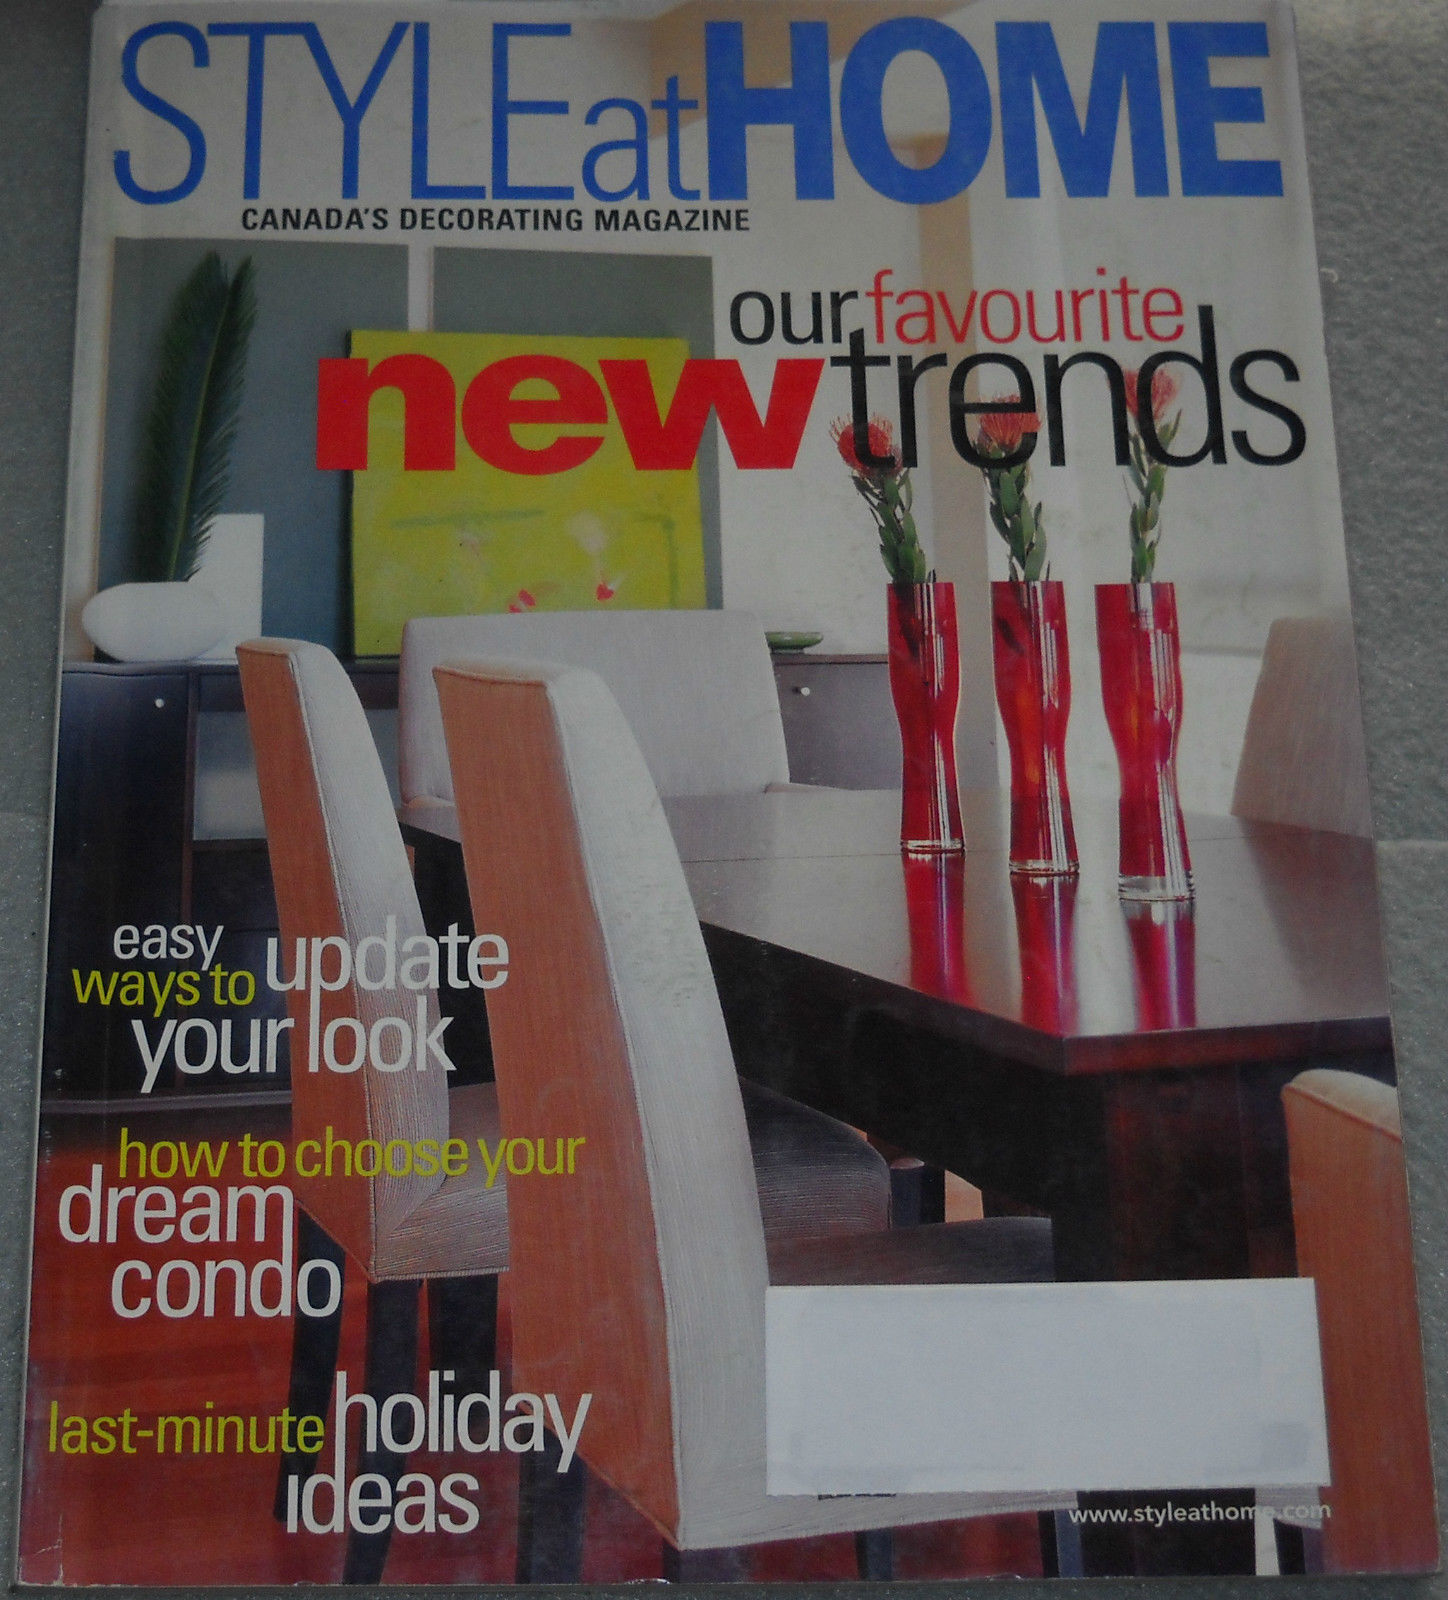 Style at Home Magazine December 2002/January 2003 Our Favourite New Trends